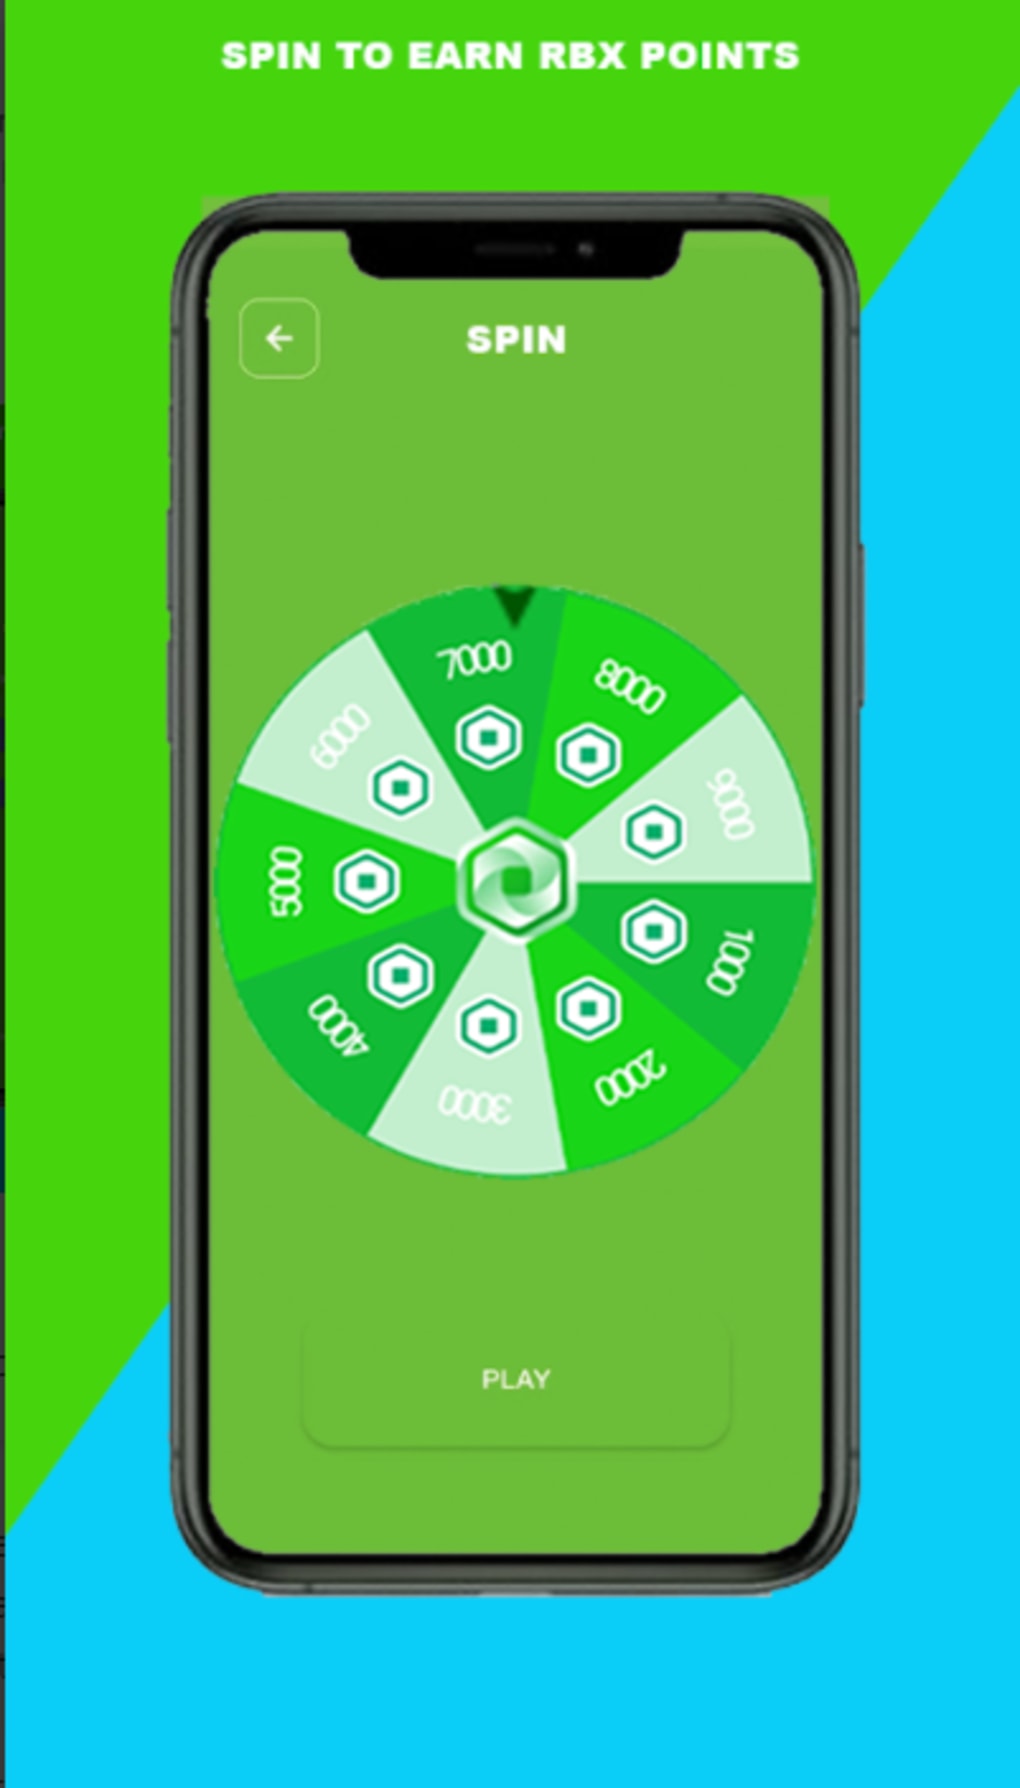 Robux Free Roulette para Android - Download